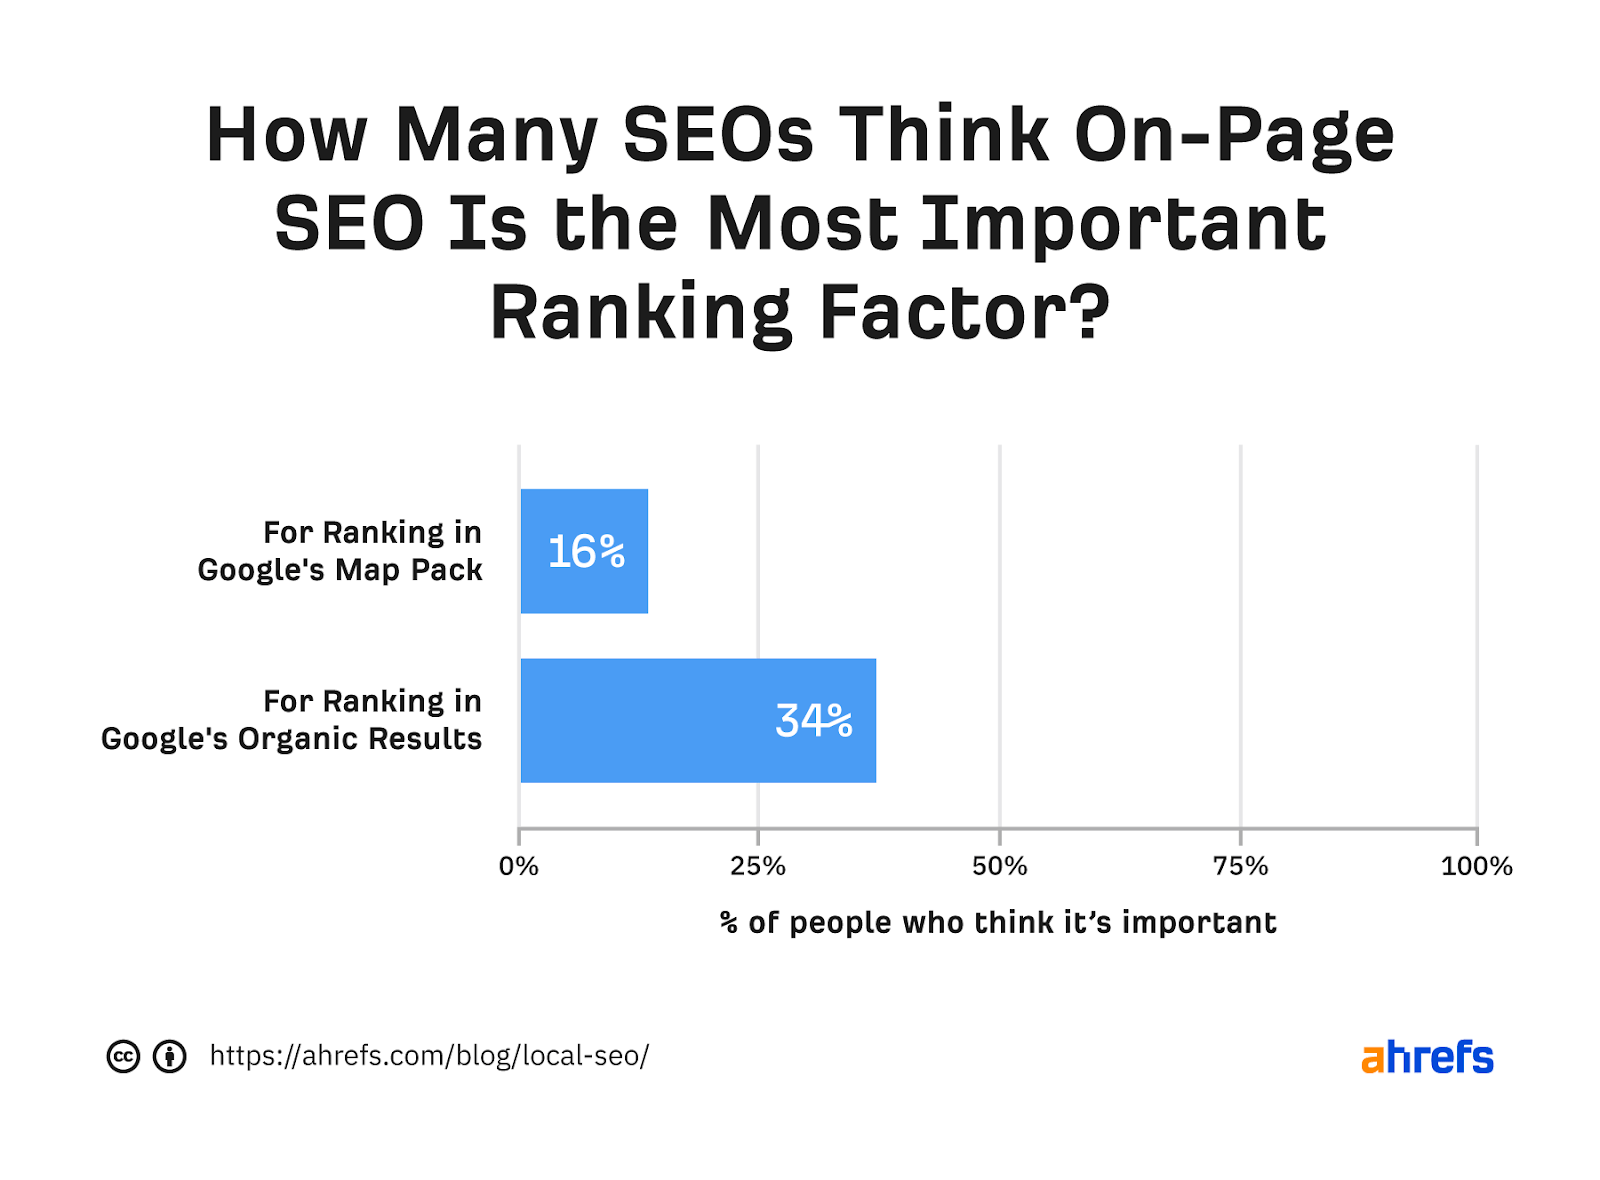 Bar graph showing percentage of SEOs who think on-page SEO is most important ranking factor for 